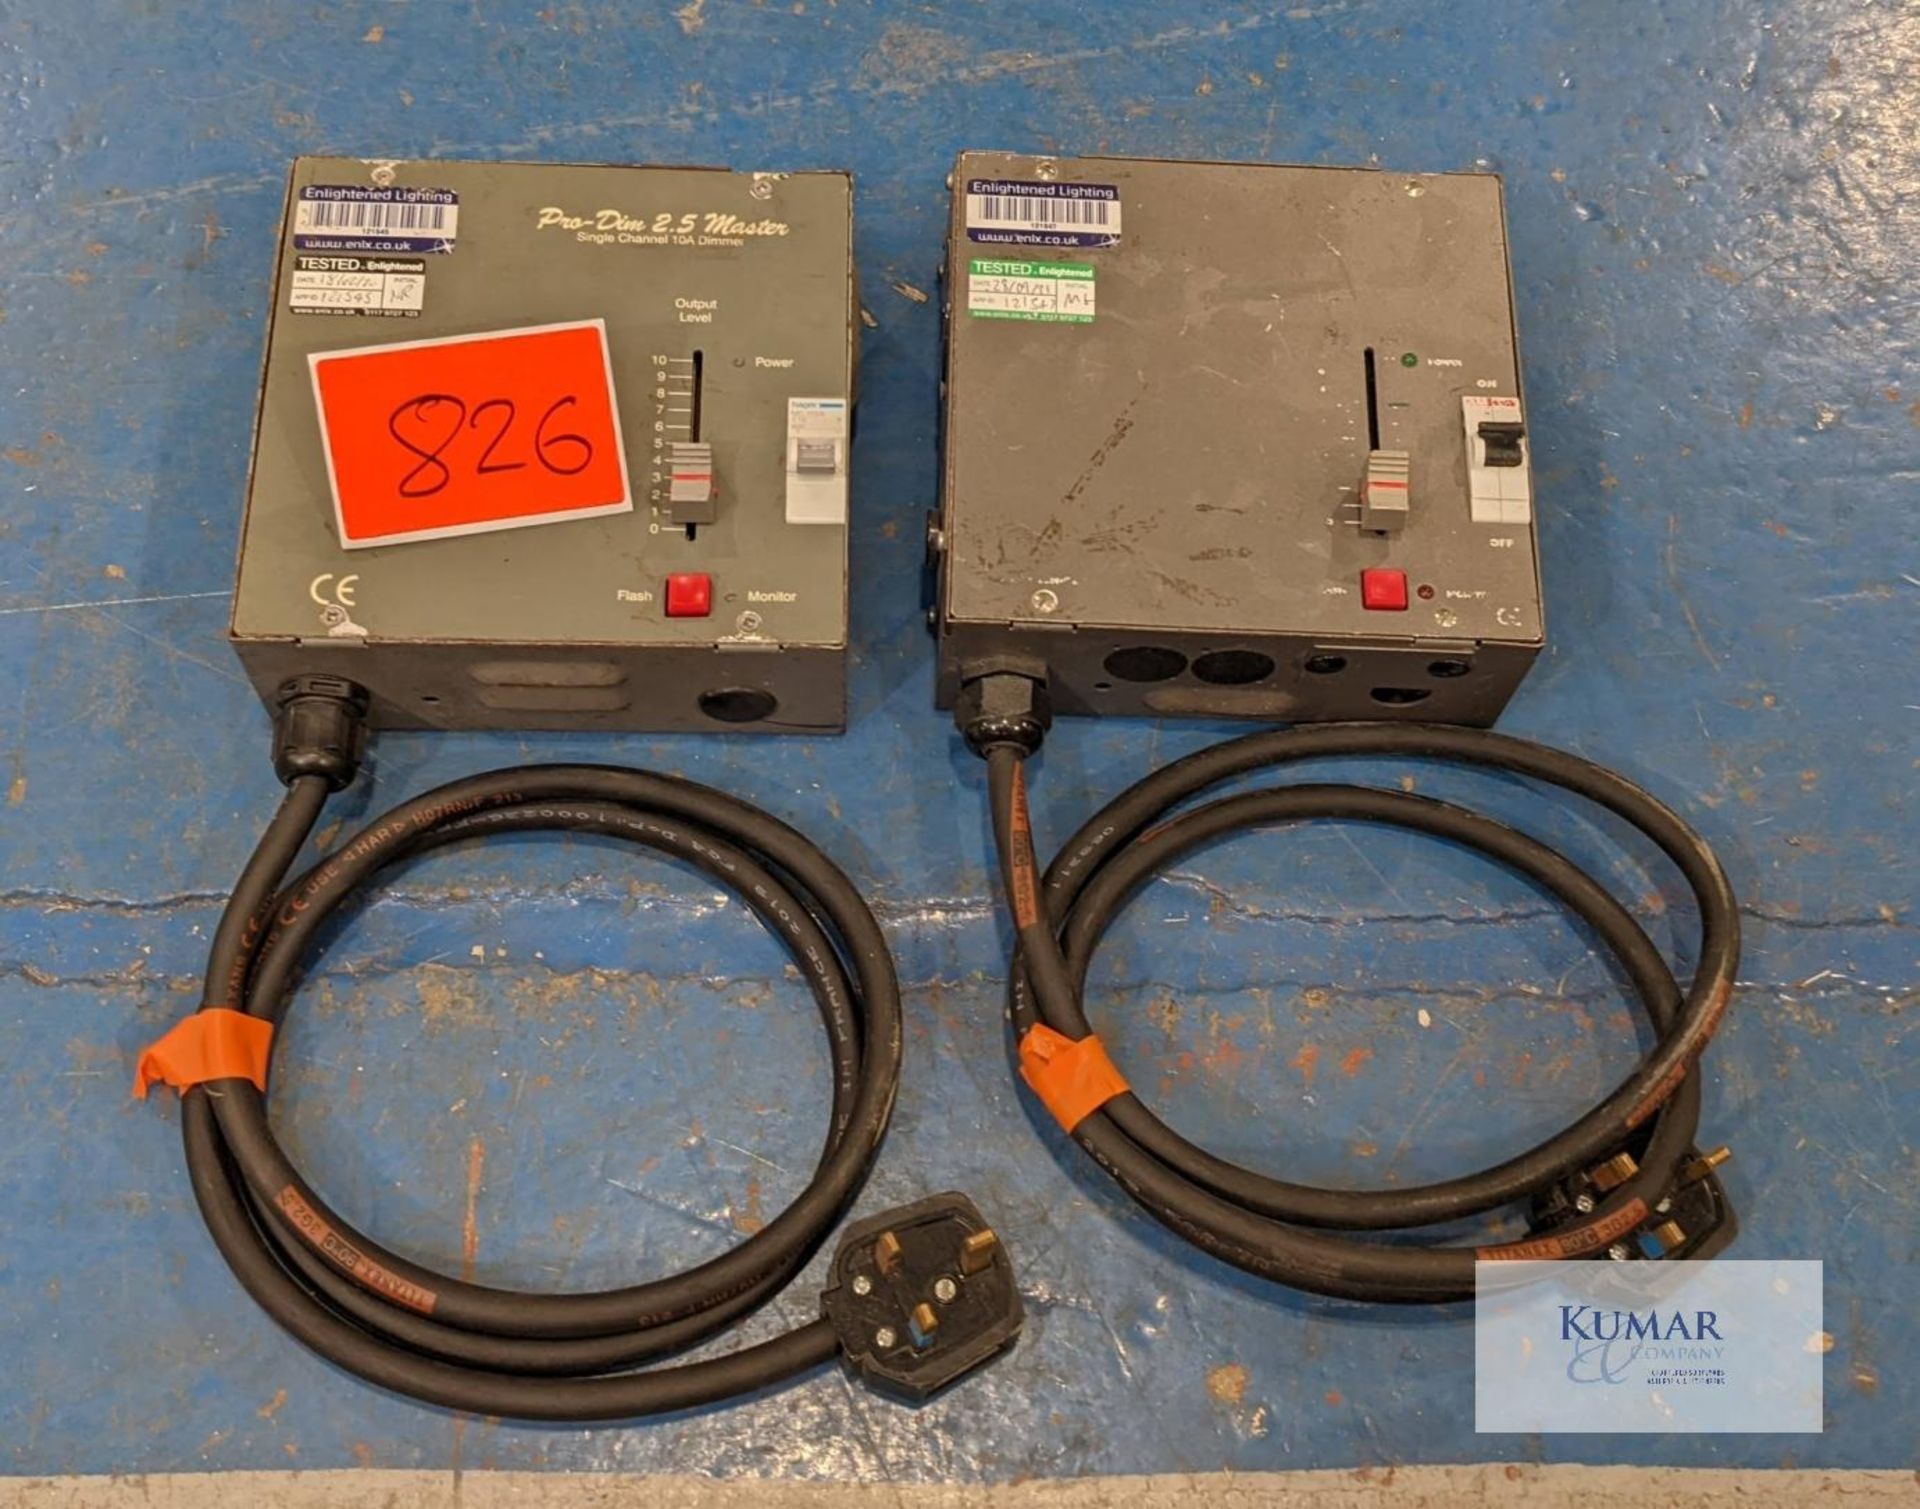 Single channel 10A dimmer - PairCondition: Ex-hireDelivery option: Delivery available to Mainland UK - Image 2 of 8